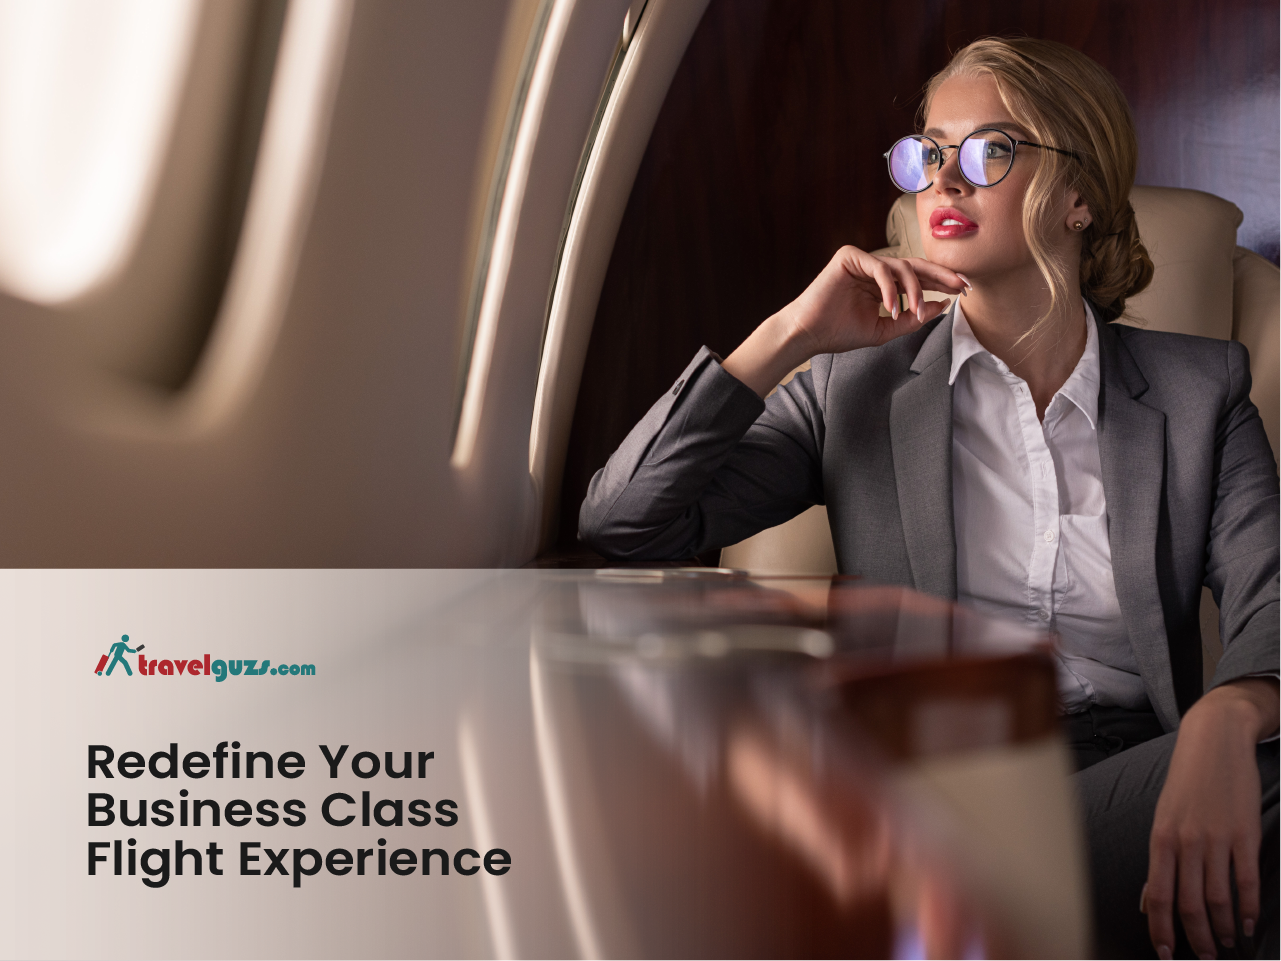 Experience redefined Business Class Flight with TravelGuzs Insider Airfares